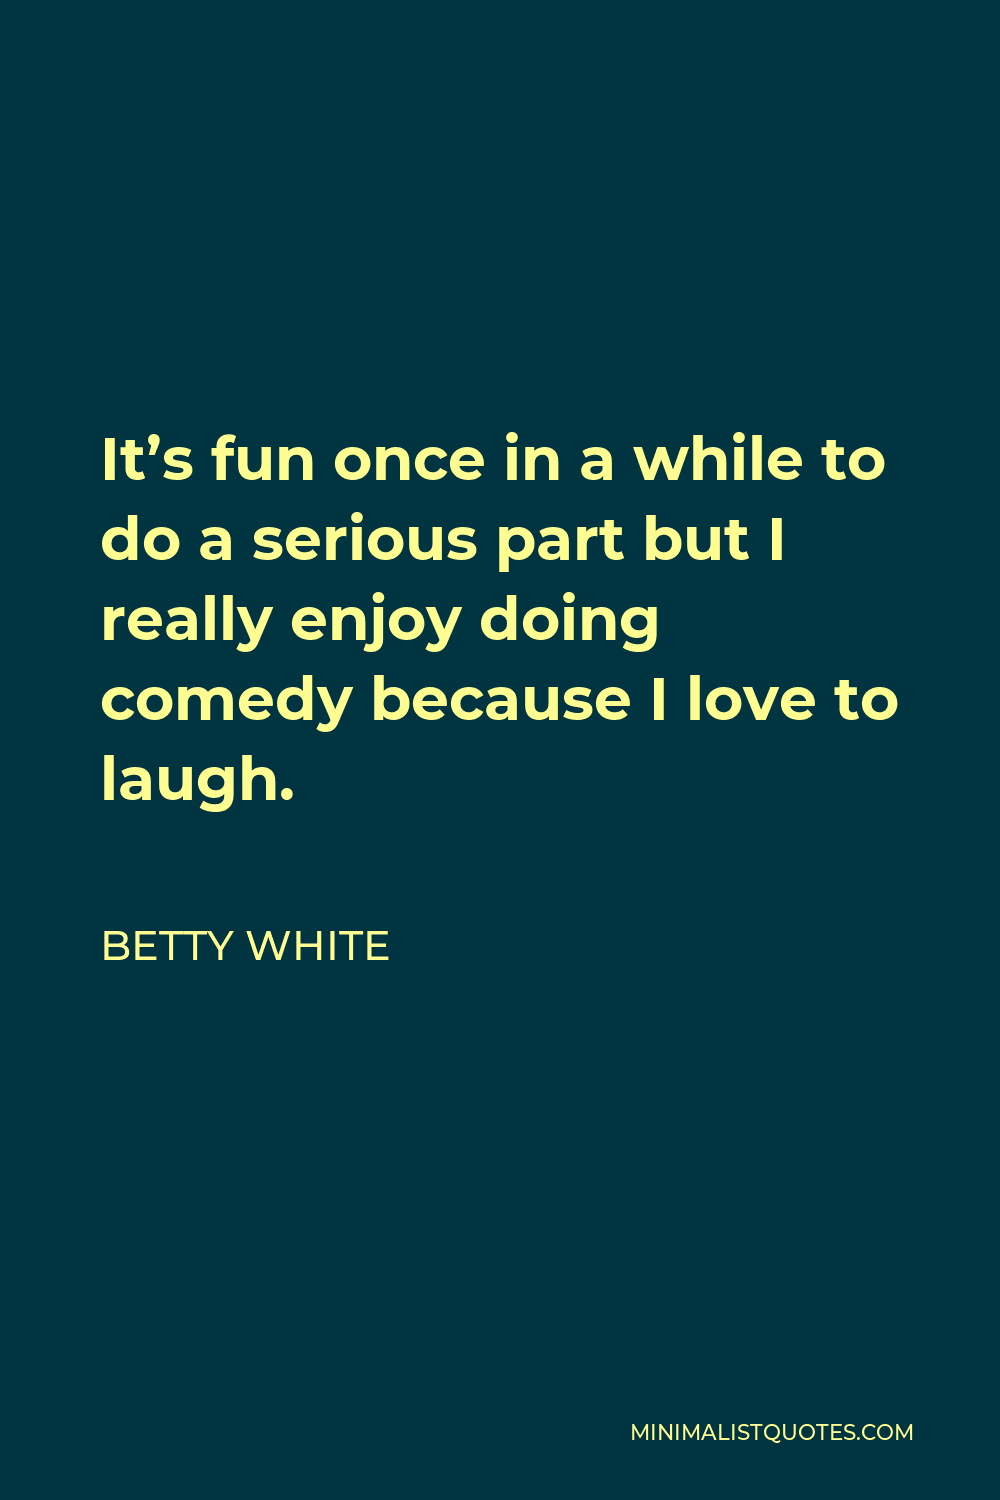 Betty White Quote - It’s fun once in a while to do a serious part but I really enjoy doing comedy because I love to laugh.